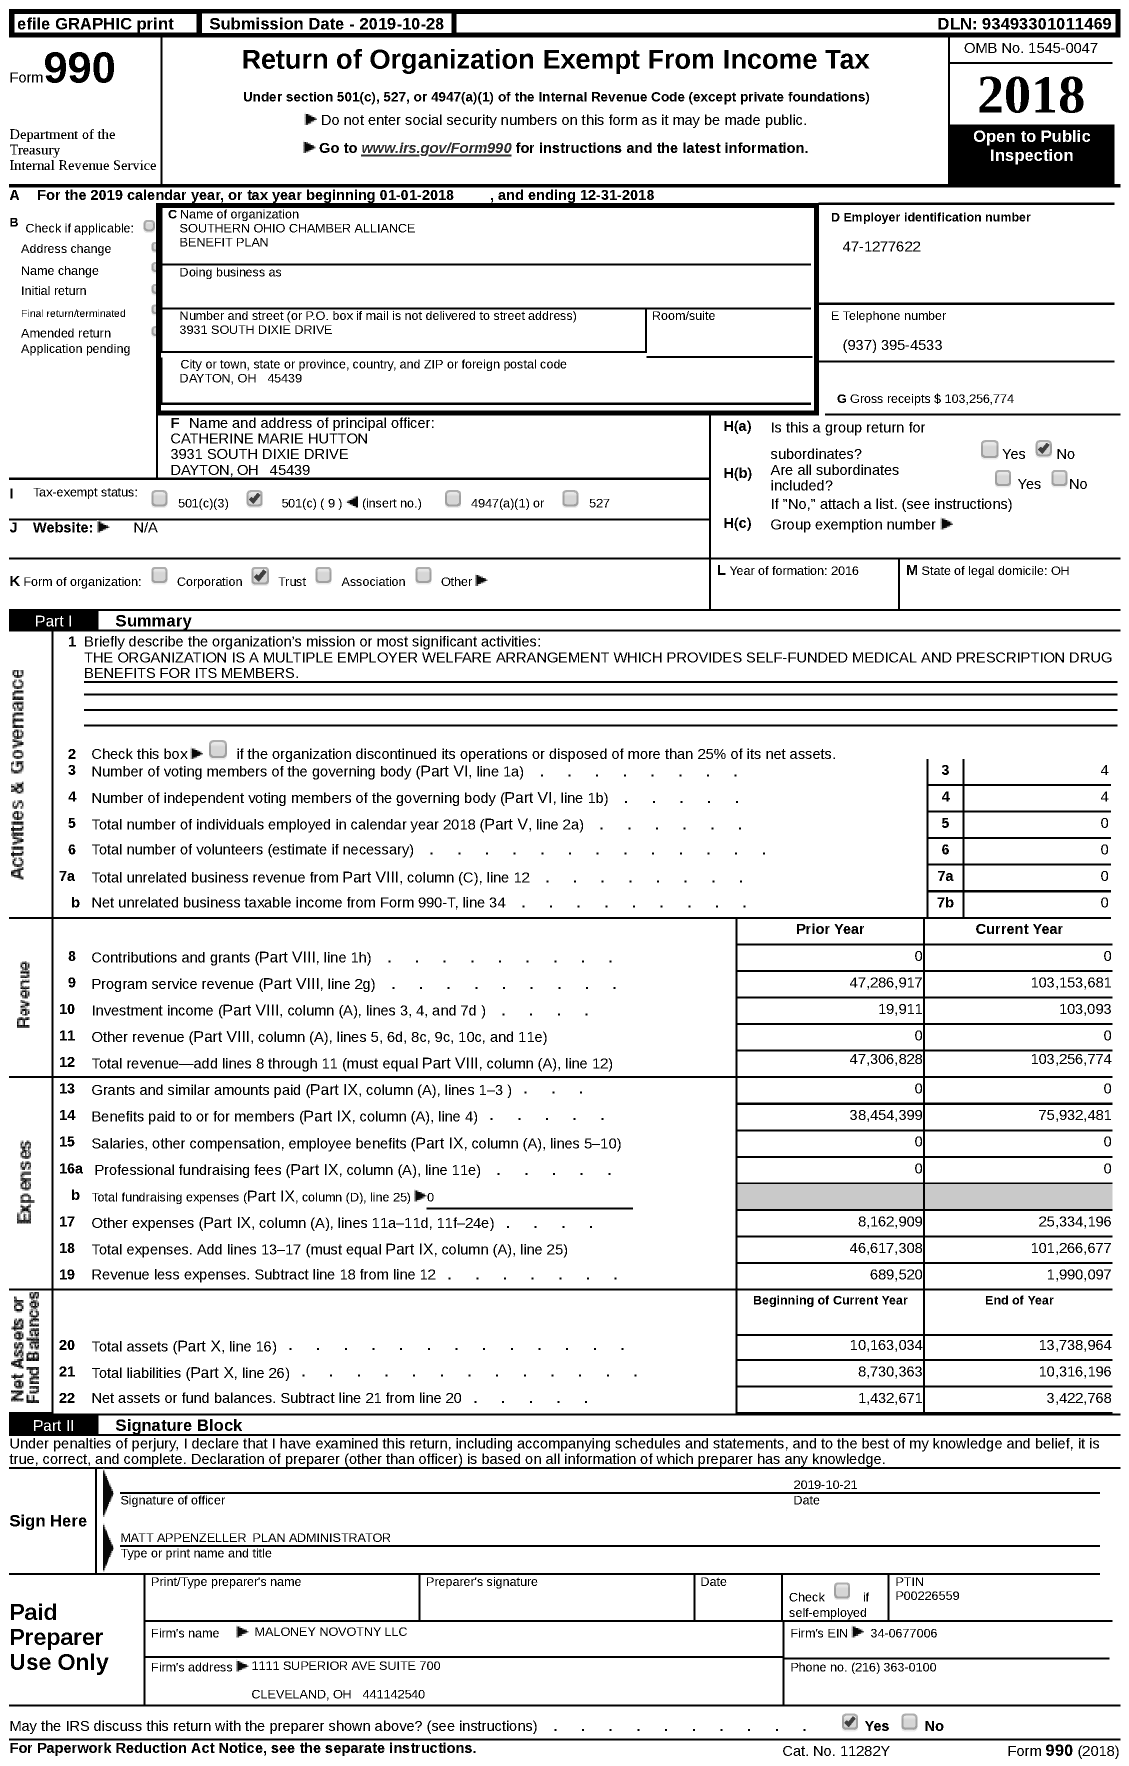 Image of first page of 2018 Form 990 for Southern Ohio Chamber Alliance Benefit Plan